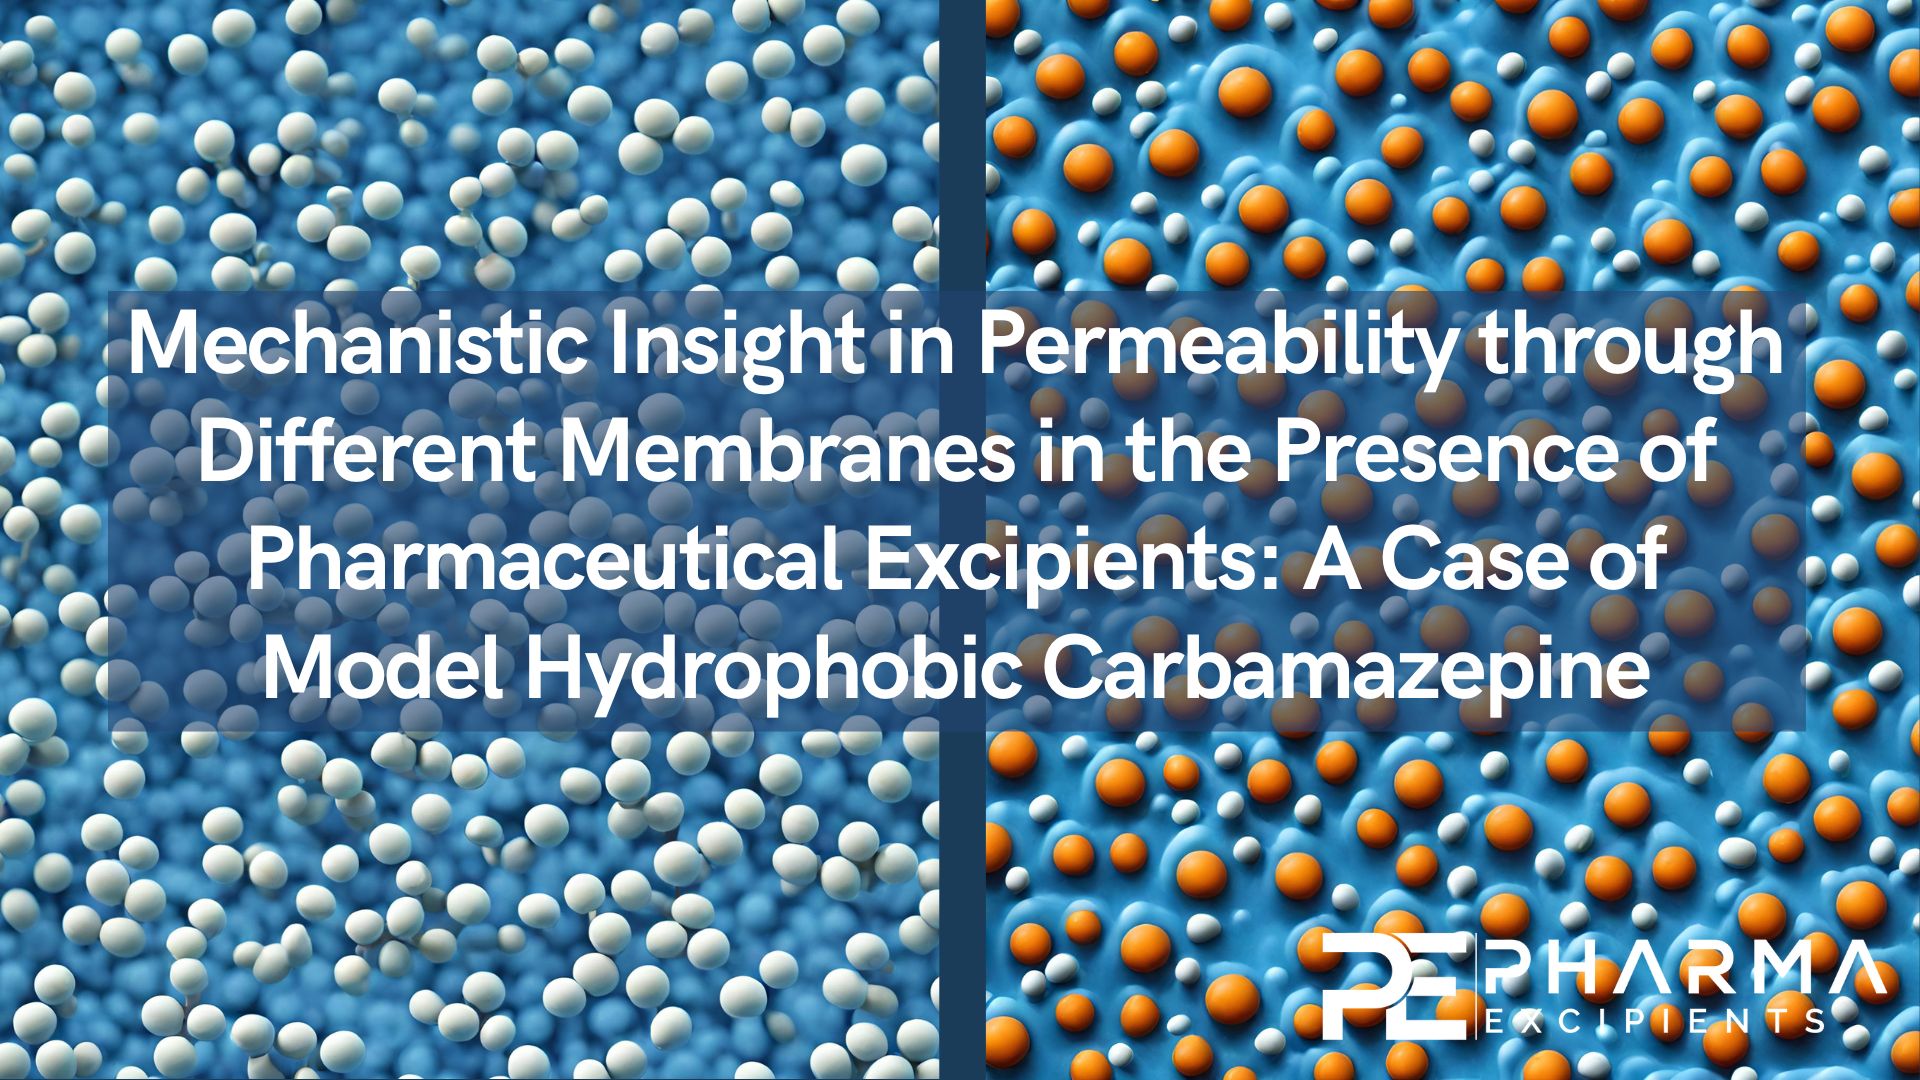 Mechanistic-Insight-in-Permeability-through-Different-Membranes-in-the-Presence-of-Pharmaceutical-Excipients-A-Case-of-Model-Hydrophobic-Carbamazepine.